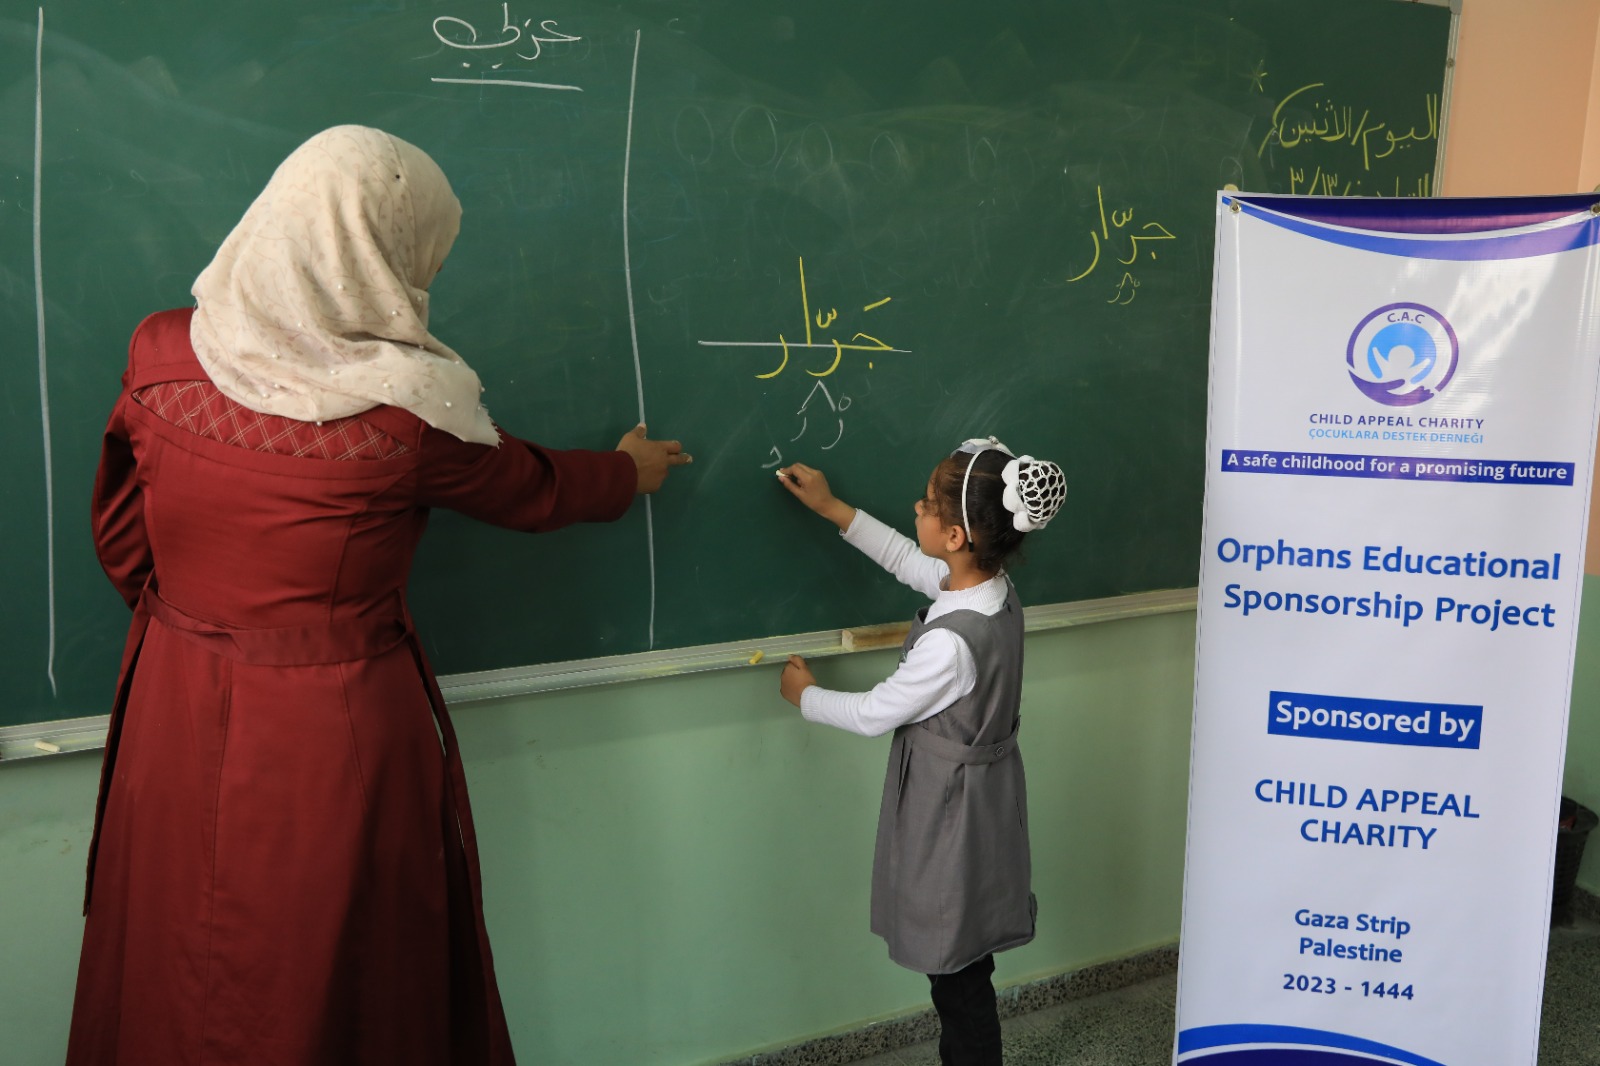 Education for orphans